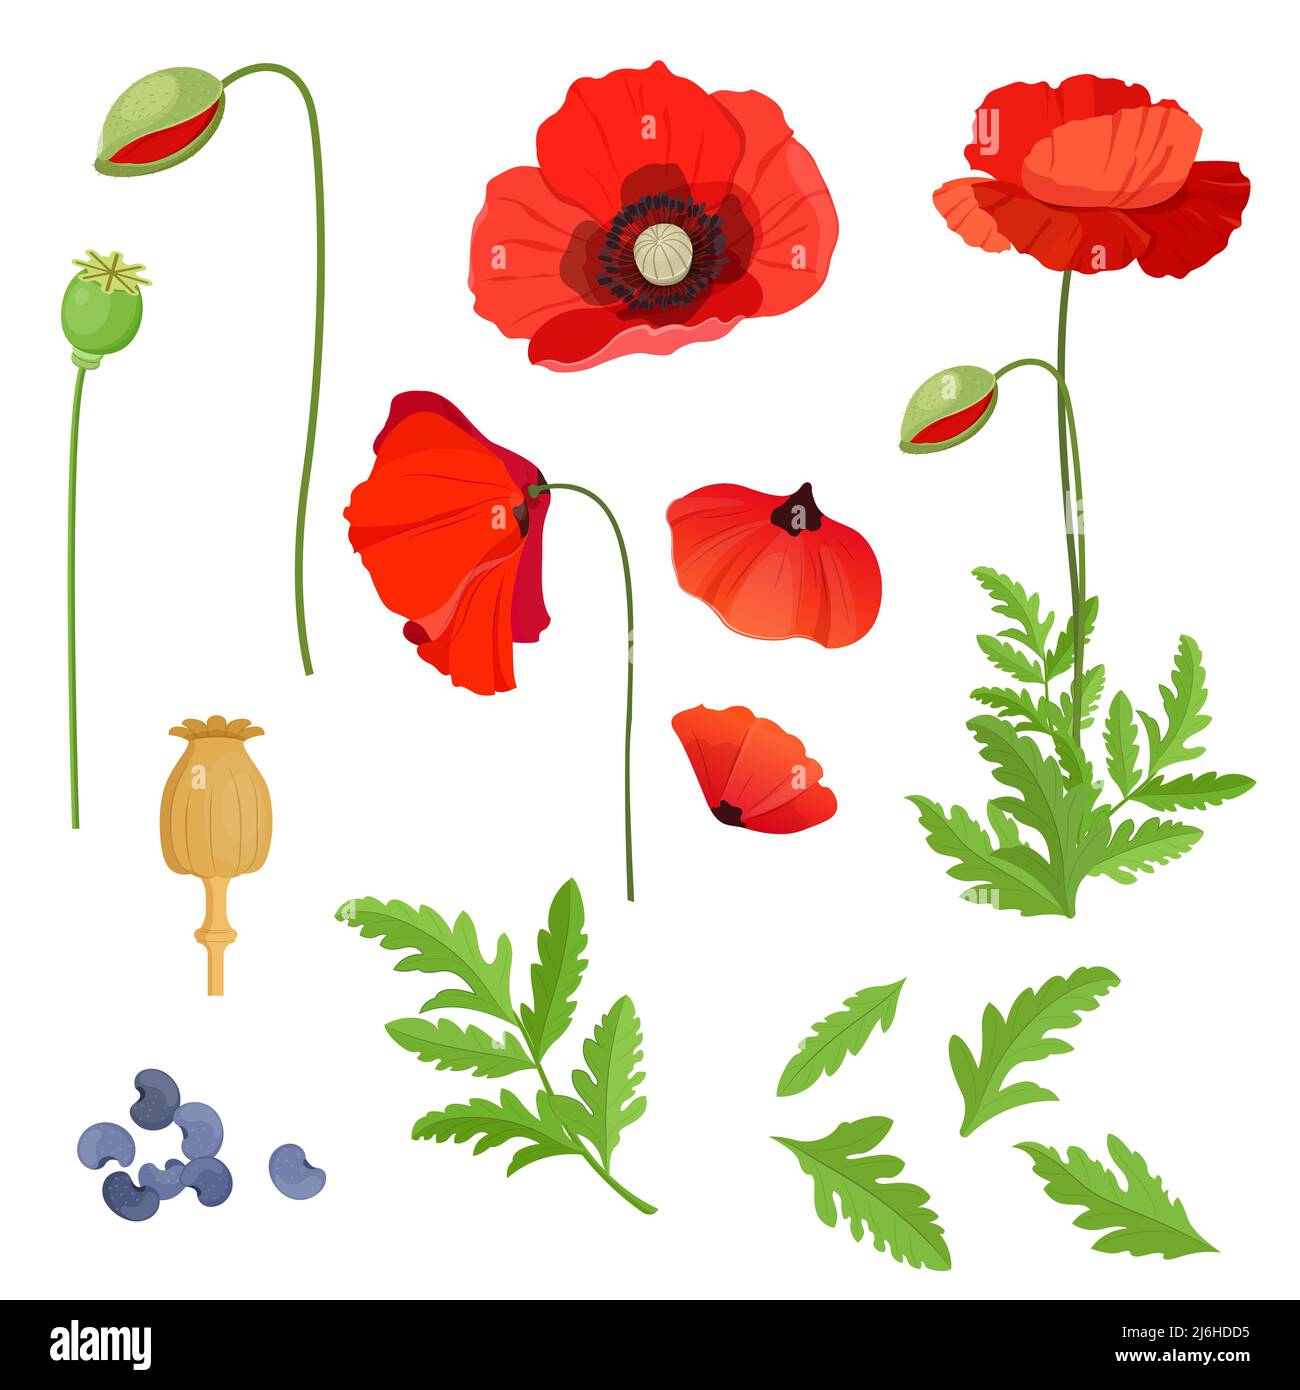 Parts Of The Poppy Flower Stock Vector